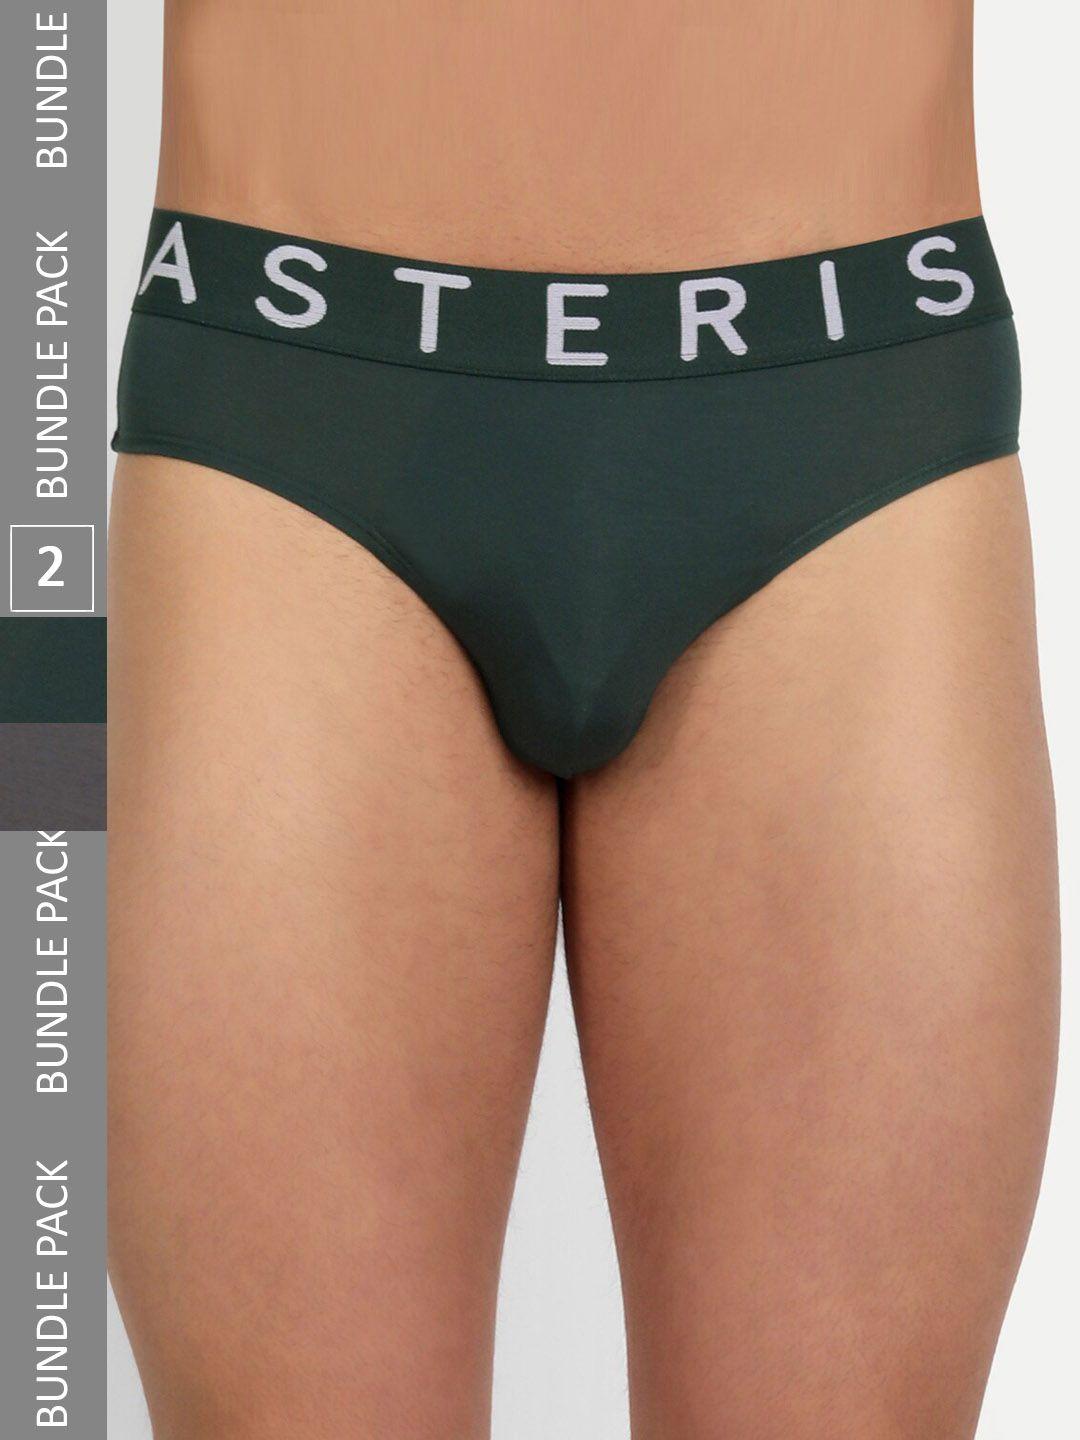 asterisk-men-pack-of-2-ultrasoft-micro-modal-briefs-with-snug-fit-mbr-mgy&fgn-xs-04